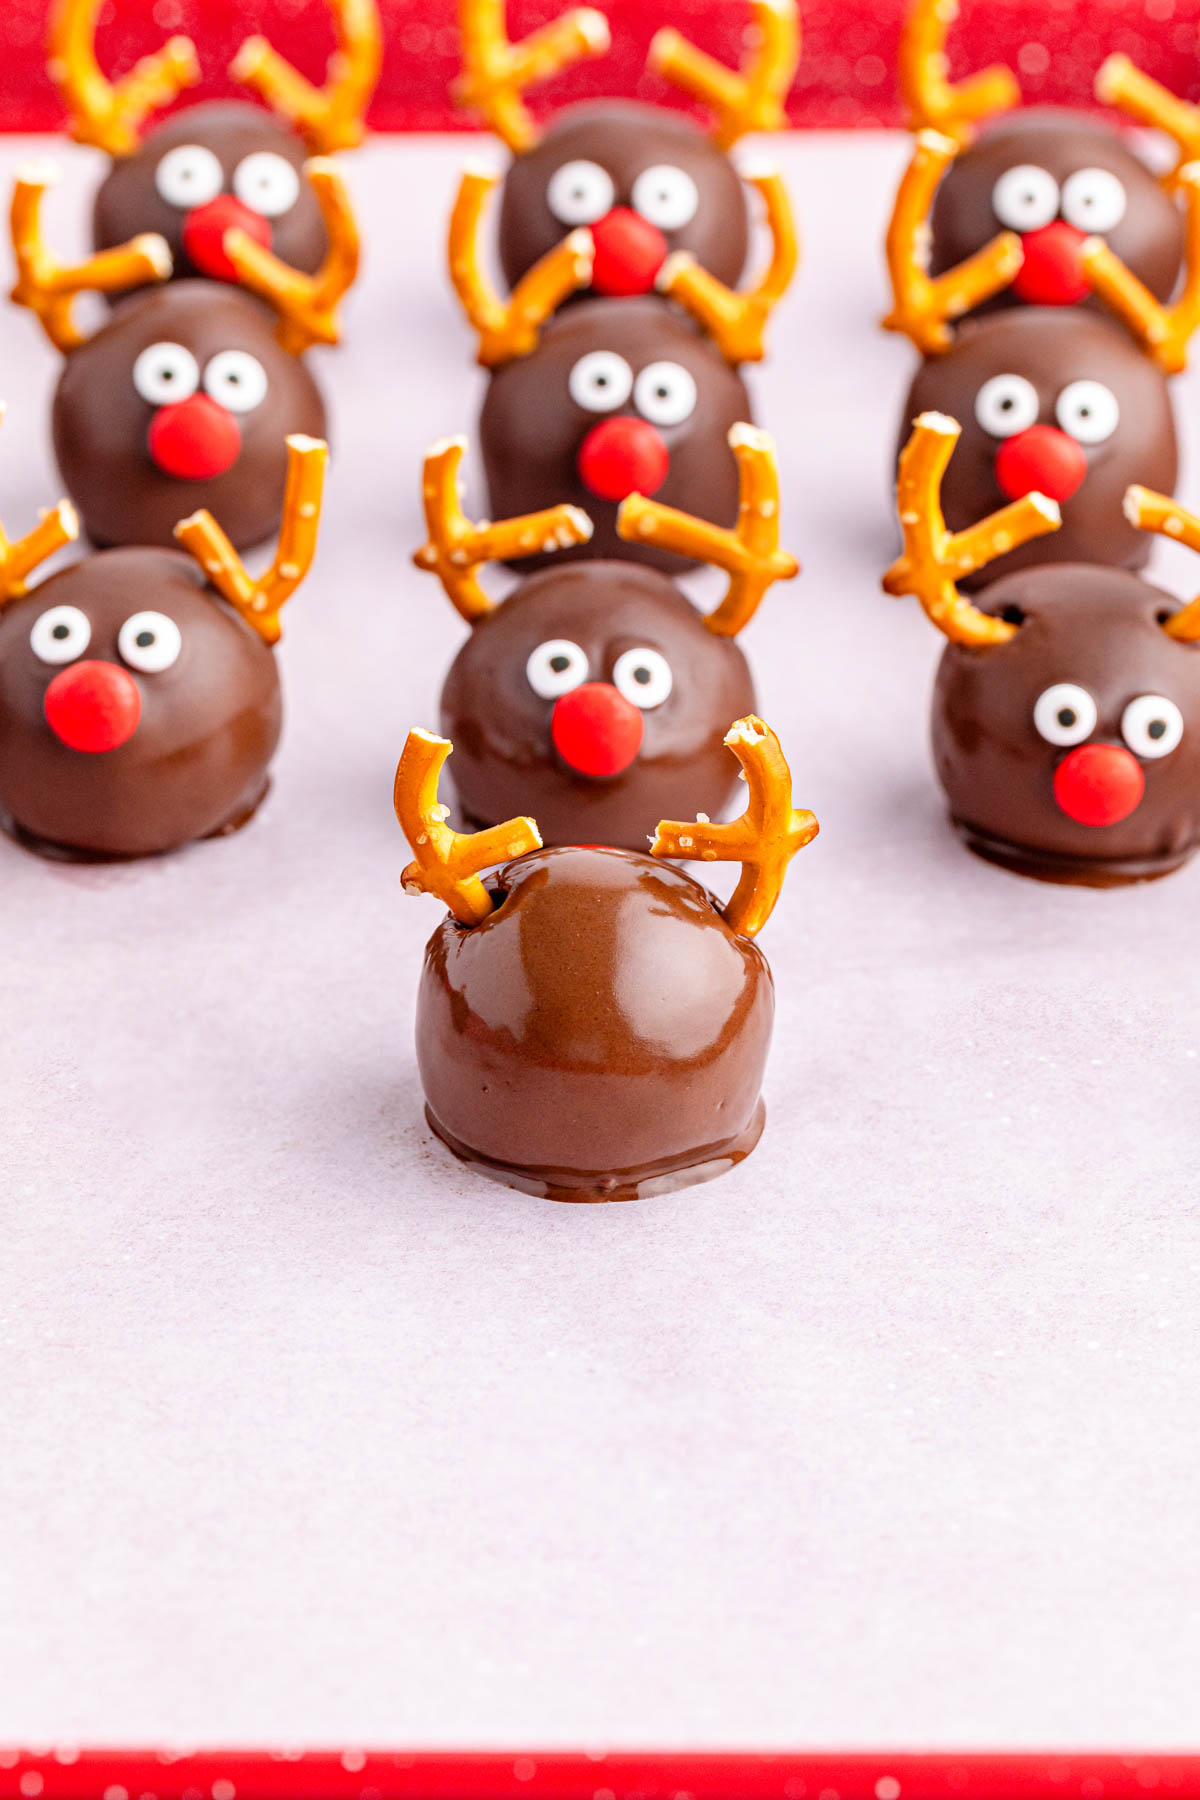 Chocolate reindeer balls on a red background.